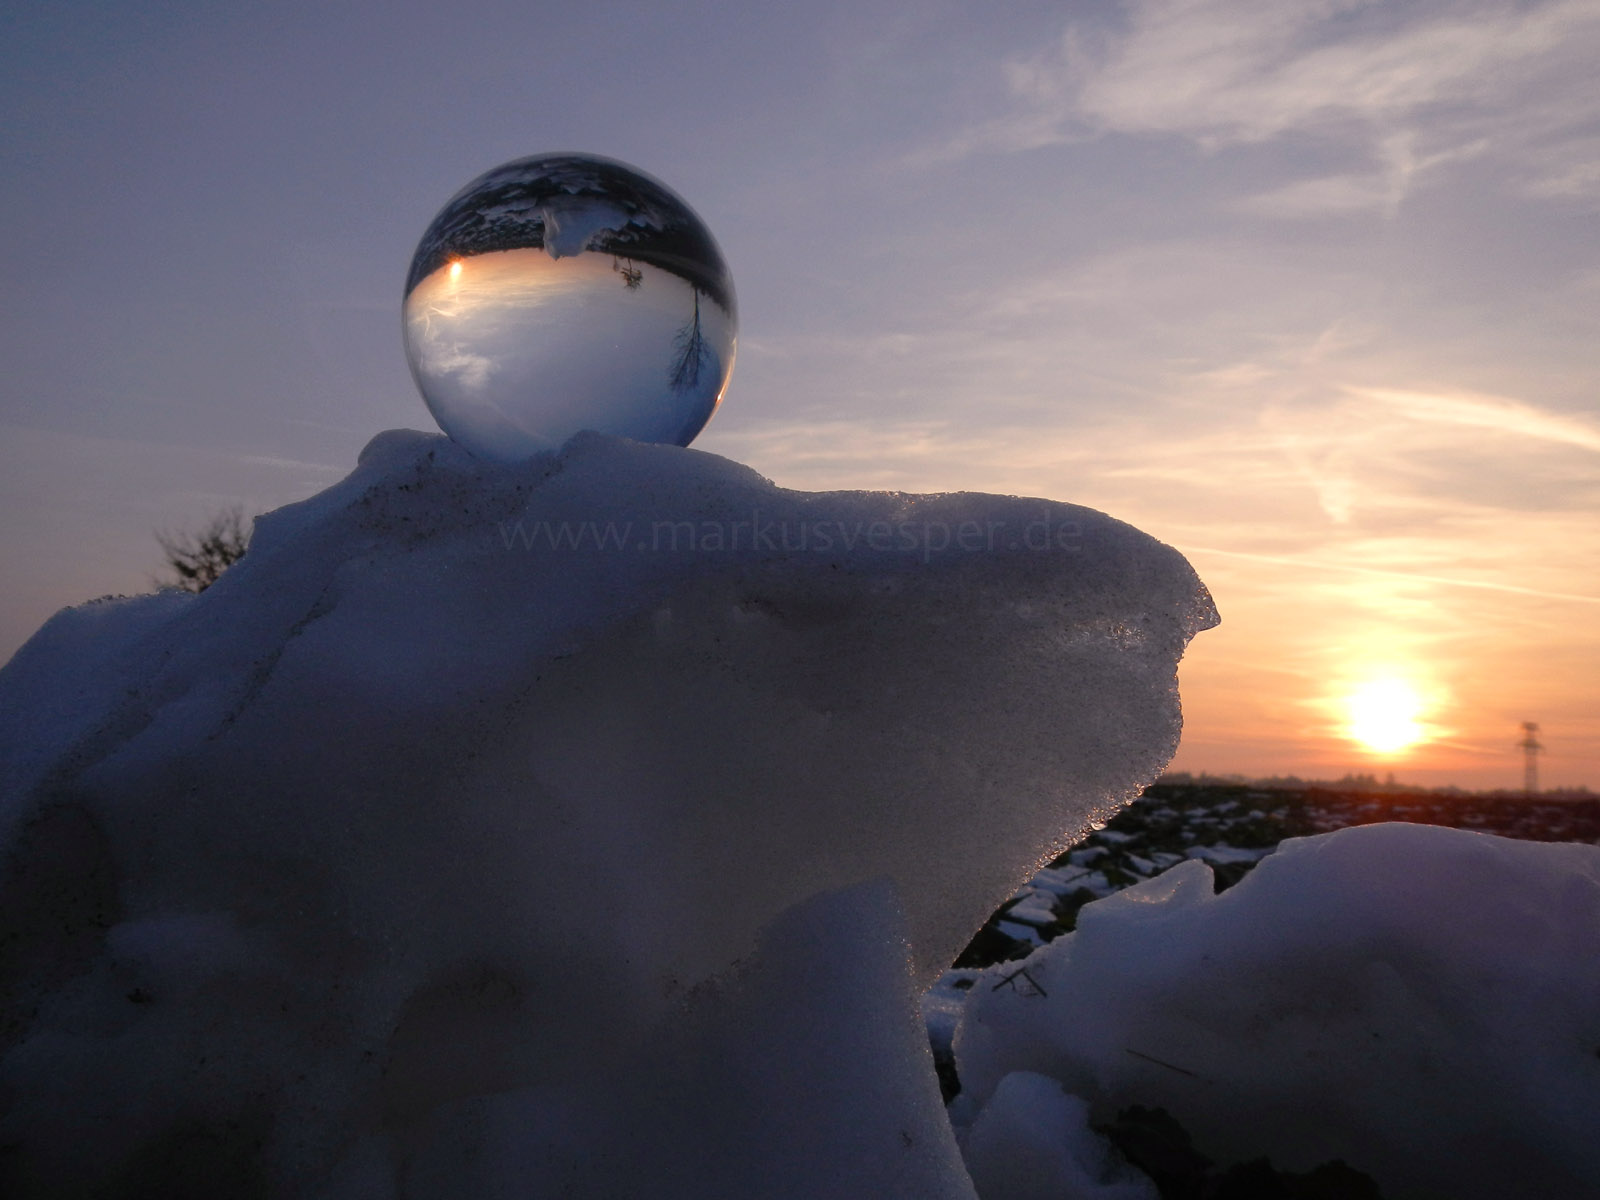 Crystaline sphere on snow pile at sunset 2